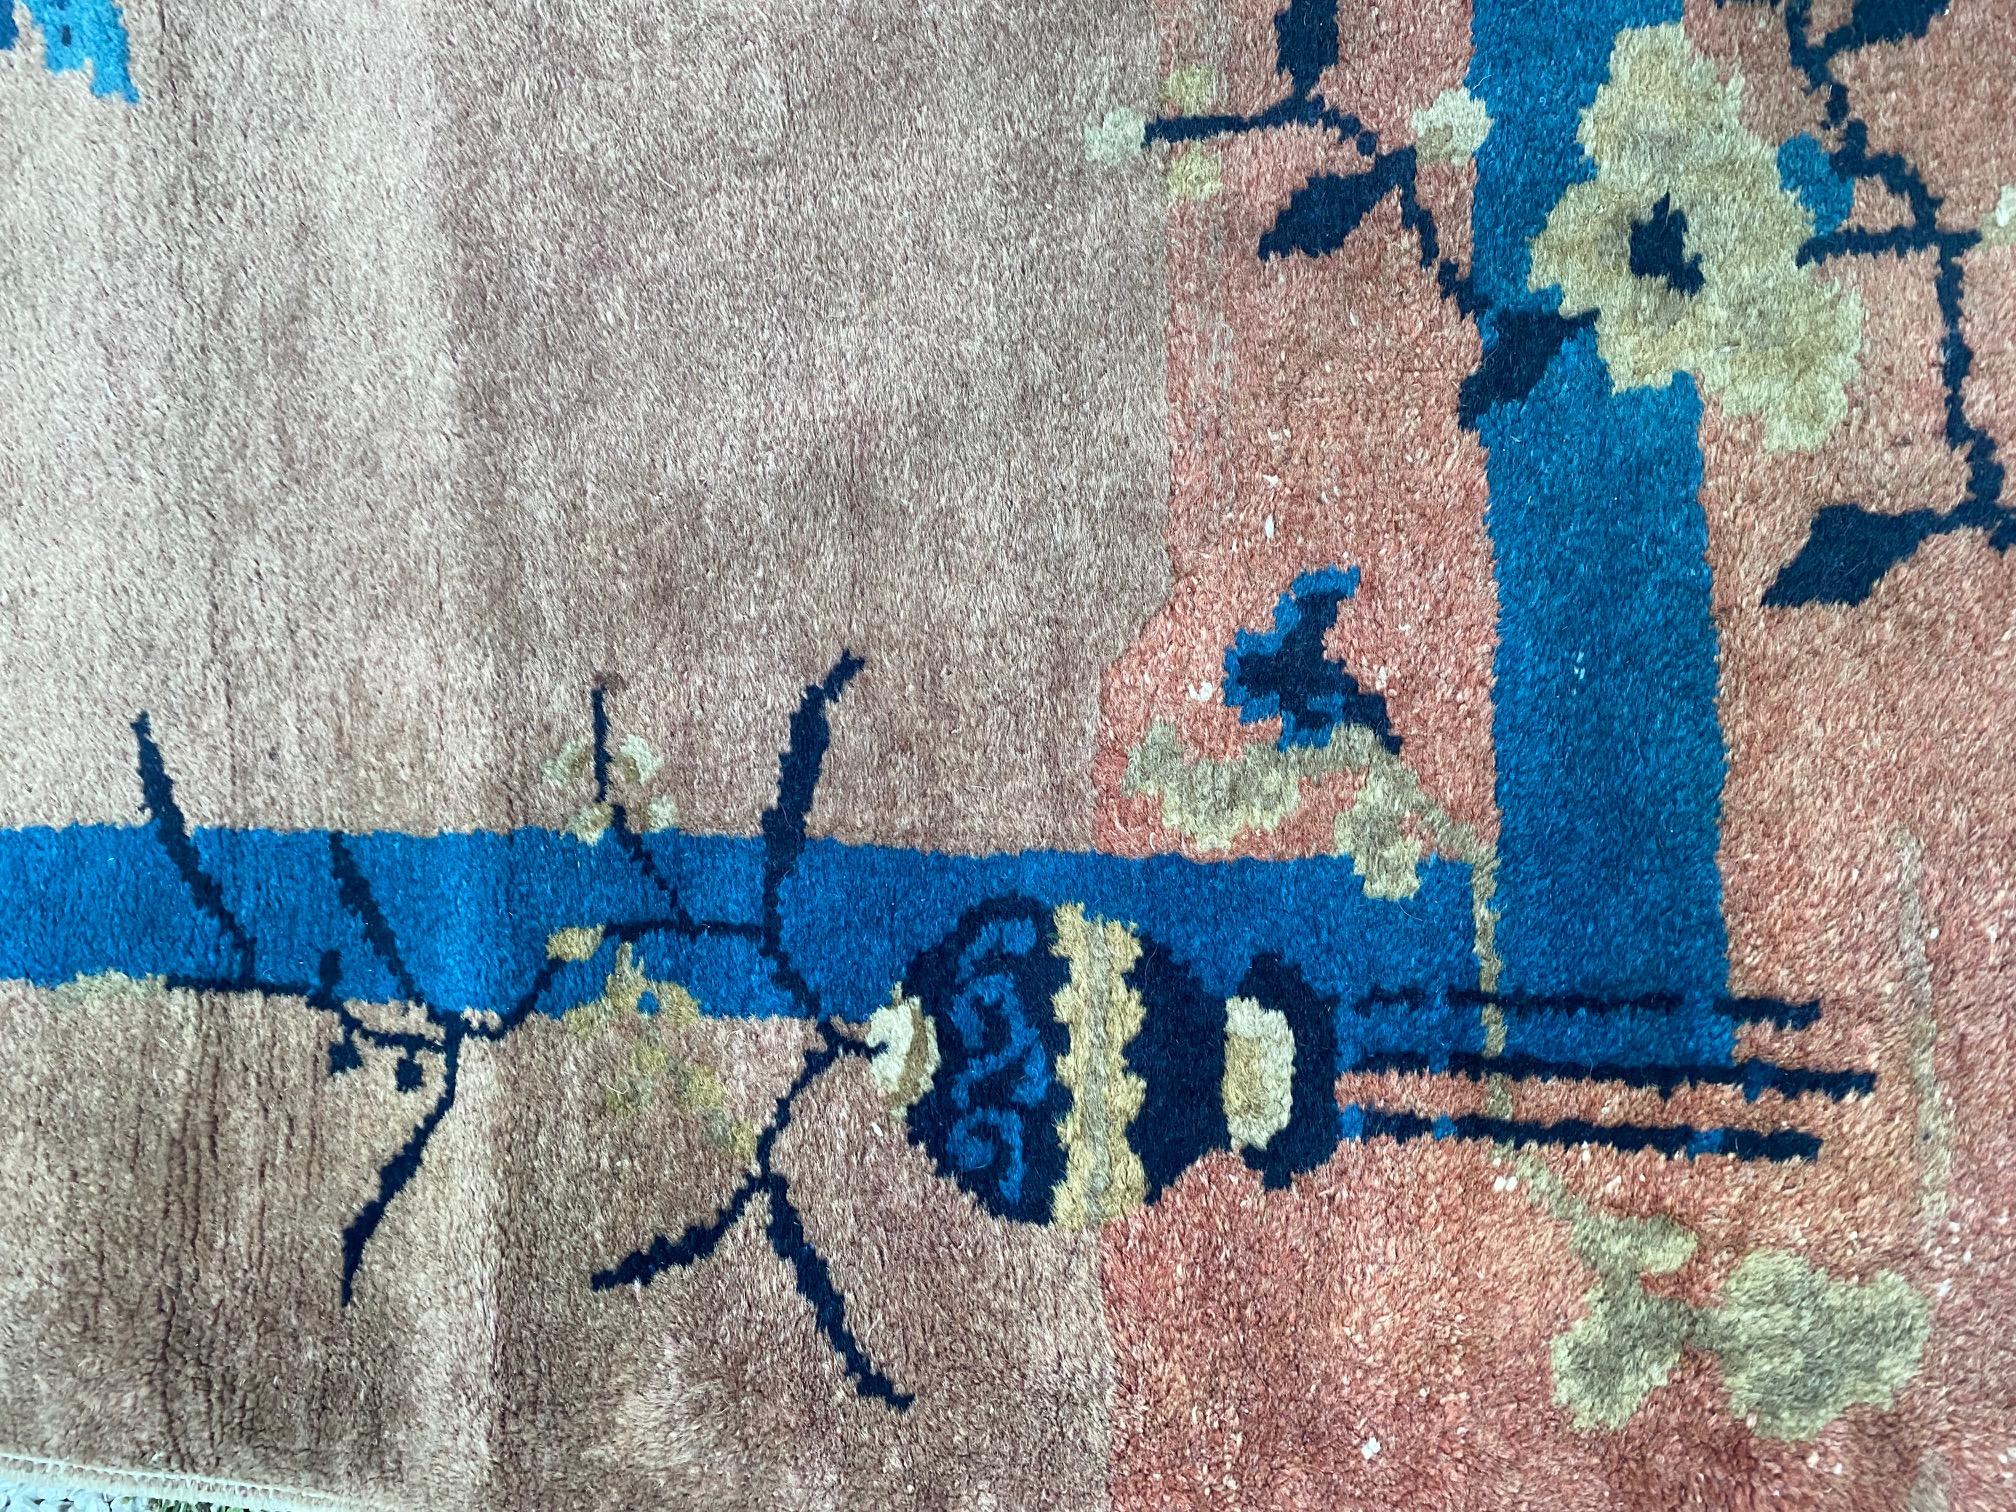 Antique Chinese Art Deco scatter rug, circa 1920, a hand knotted wool carpet featuring cobalt and sky blue floral sprigs on a dark salmon ground. In excellent condition.

Measures: 3 ft x 5 ft.